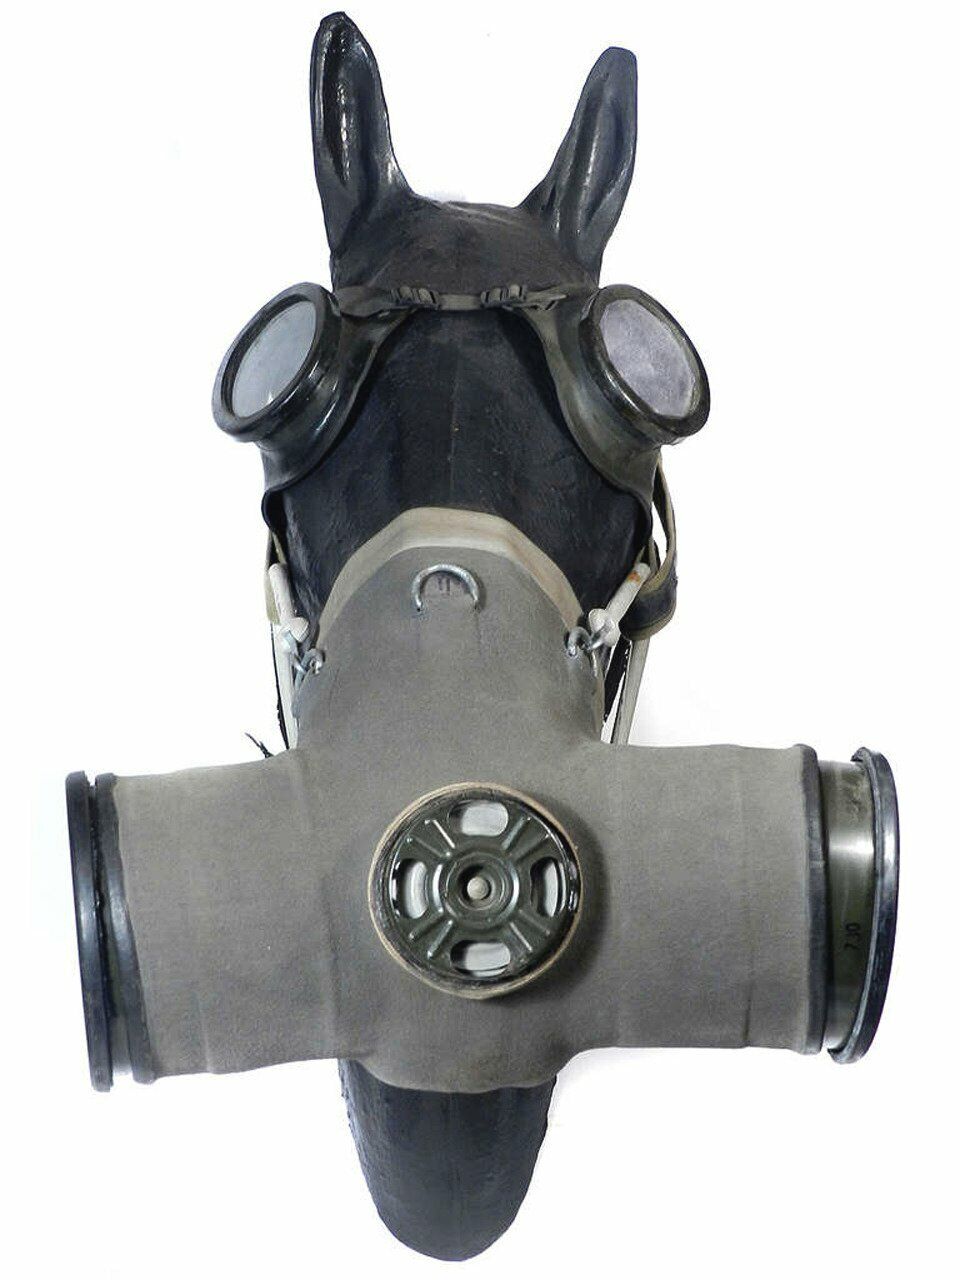 Romania gas mask for horses during the Cold War Full rare